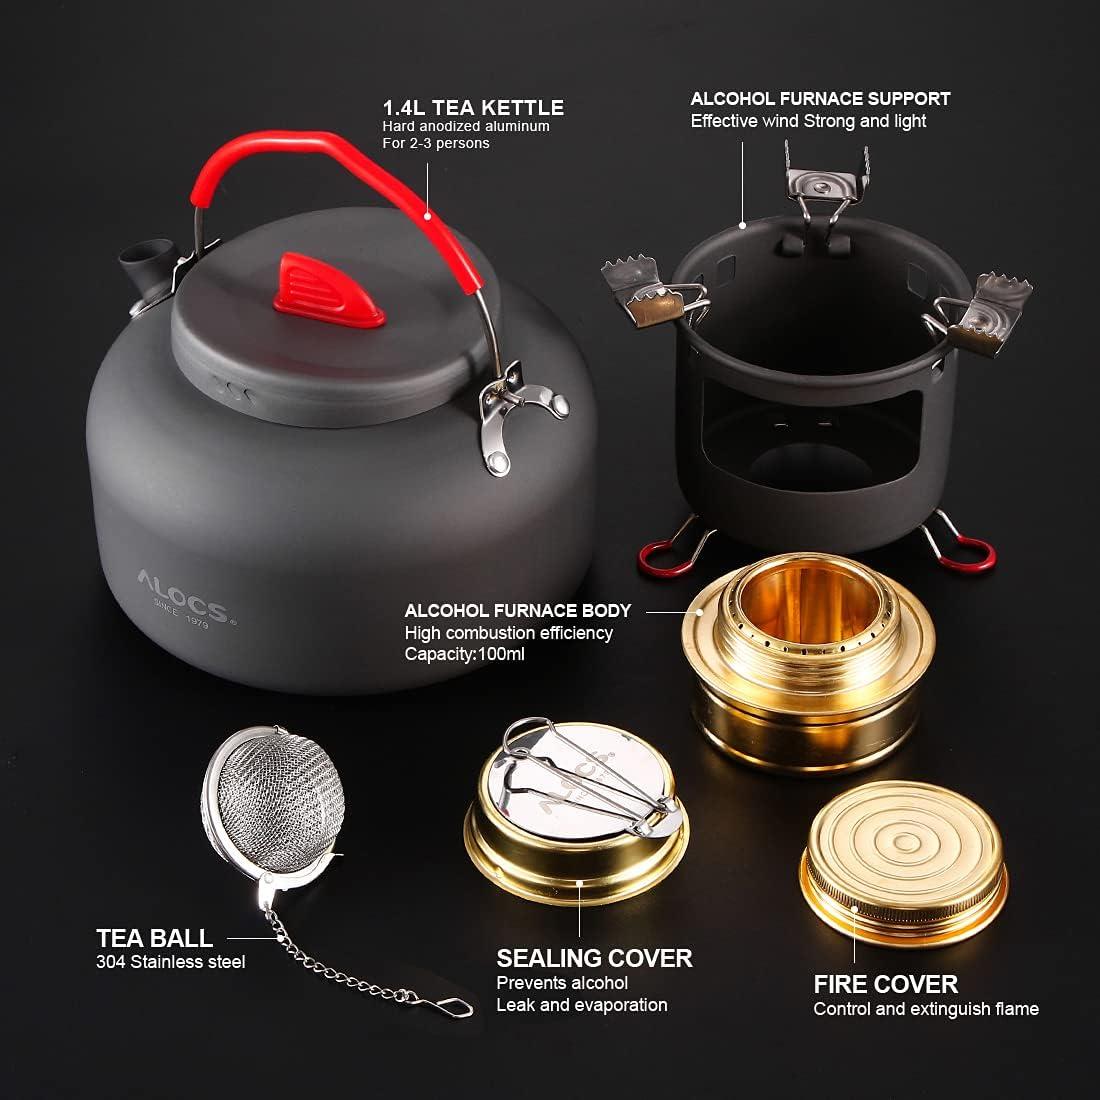 Alocs 1.3L Camping Kettle with Heat Exchanger Aluminum Portable Camping Tea  Kettle Compact Outdoor Hiking Picnic Camping Water Kettle Lightweight Teapot  Coffee Pot